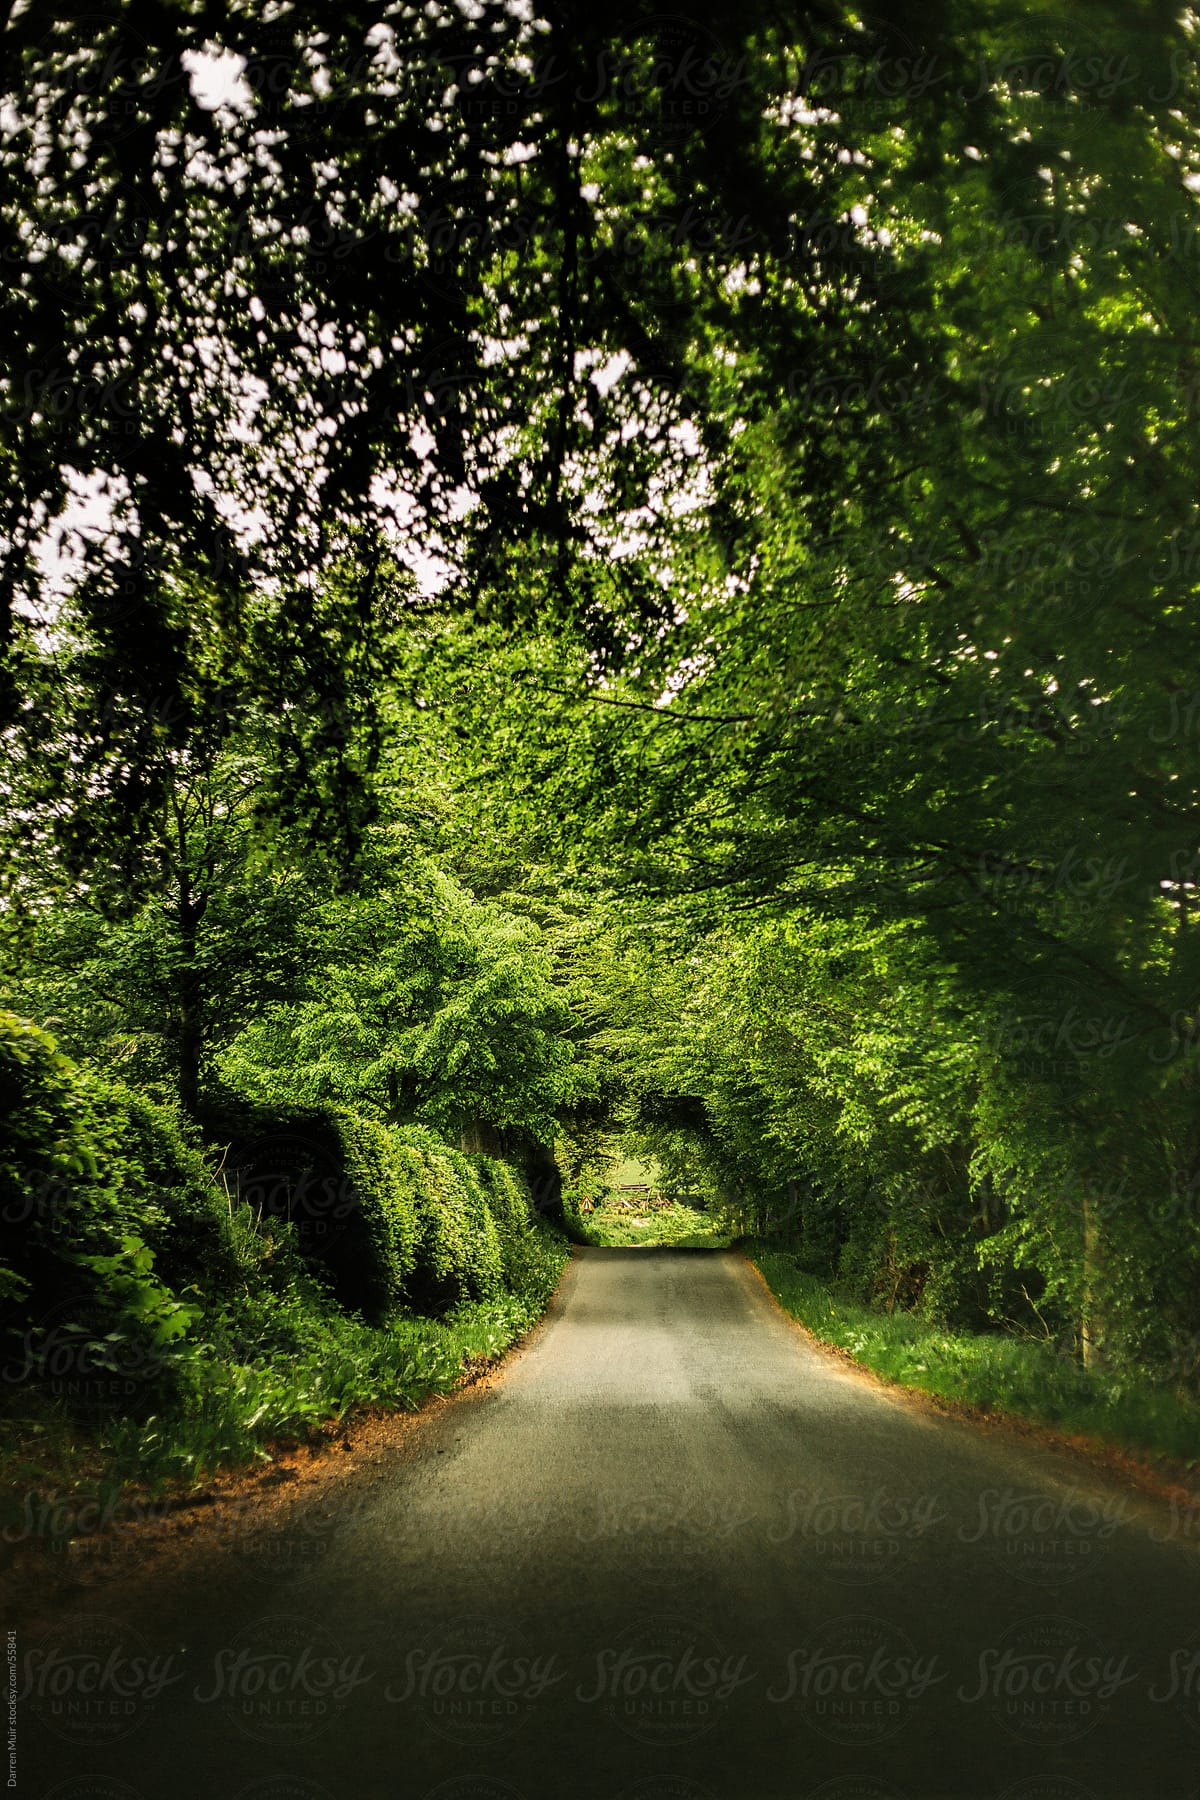 Leafy country road.